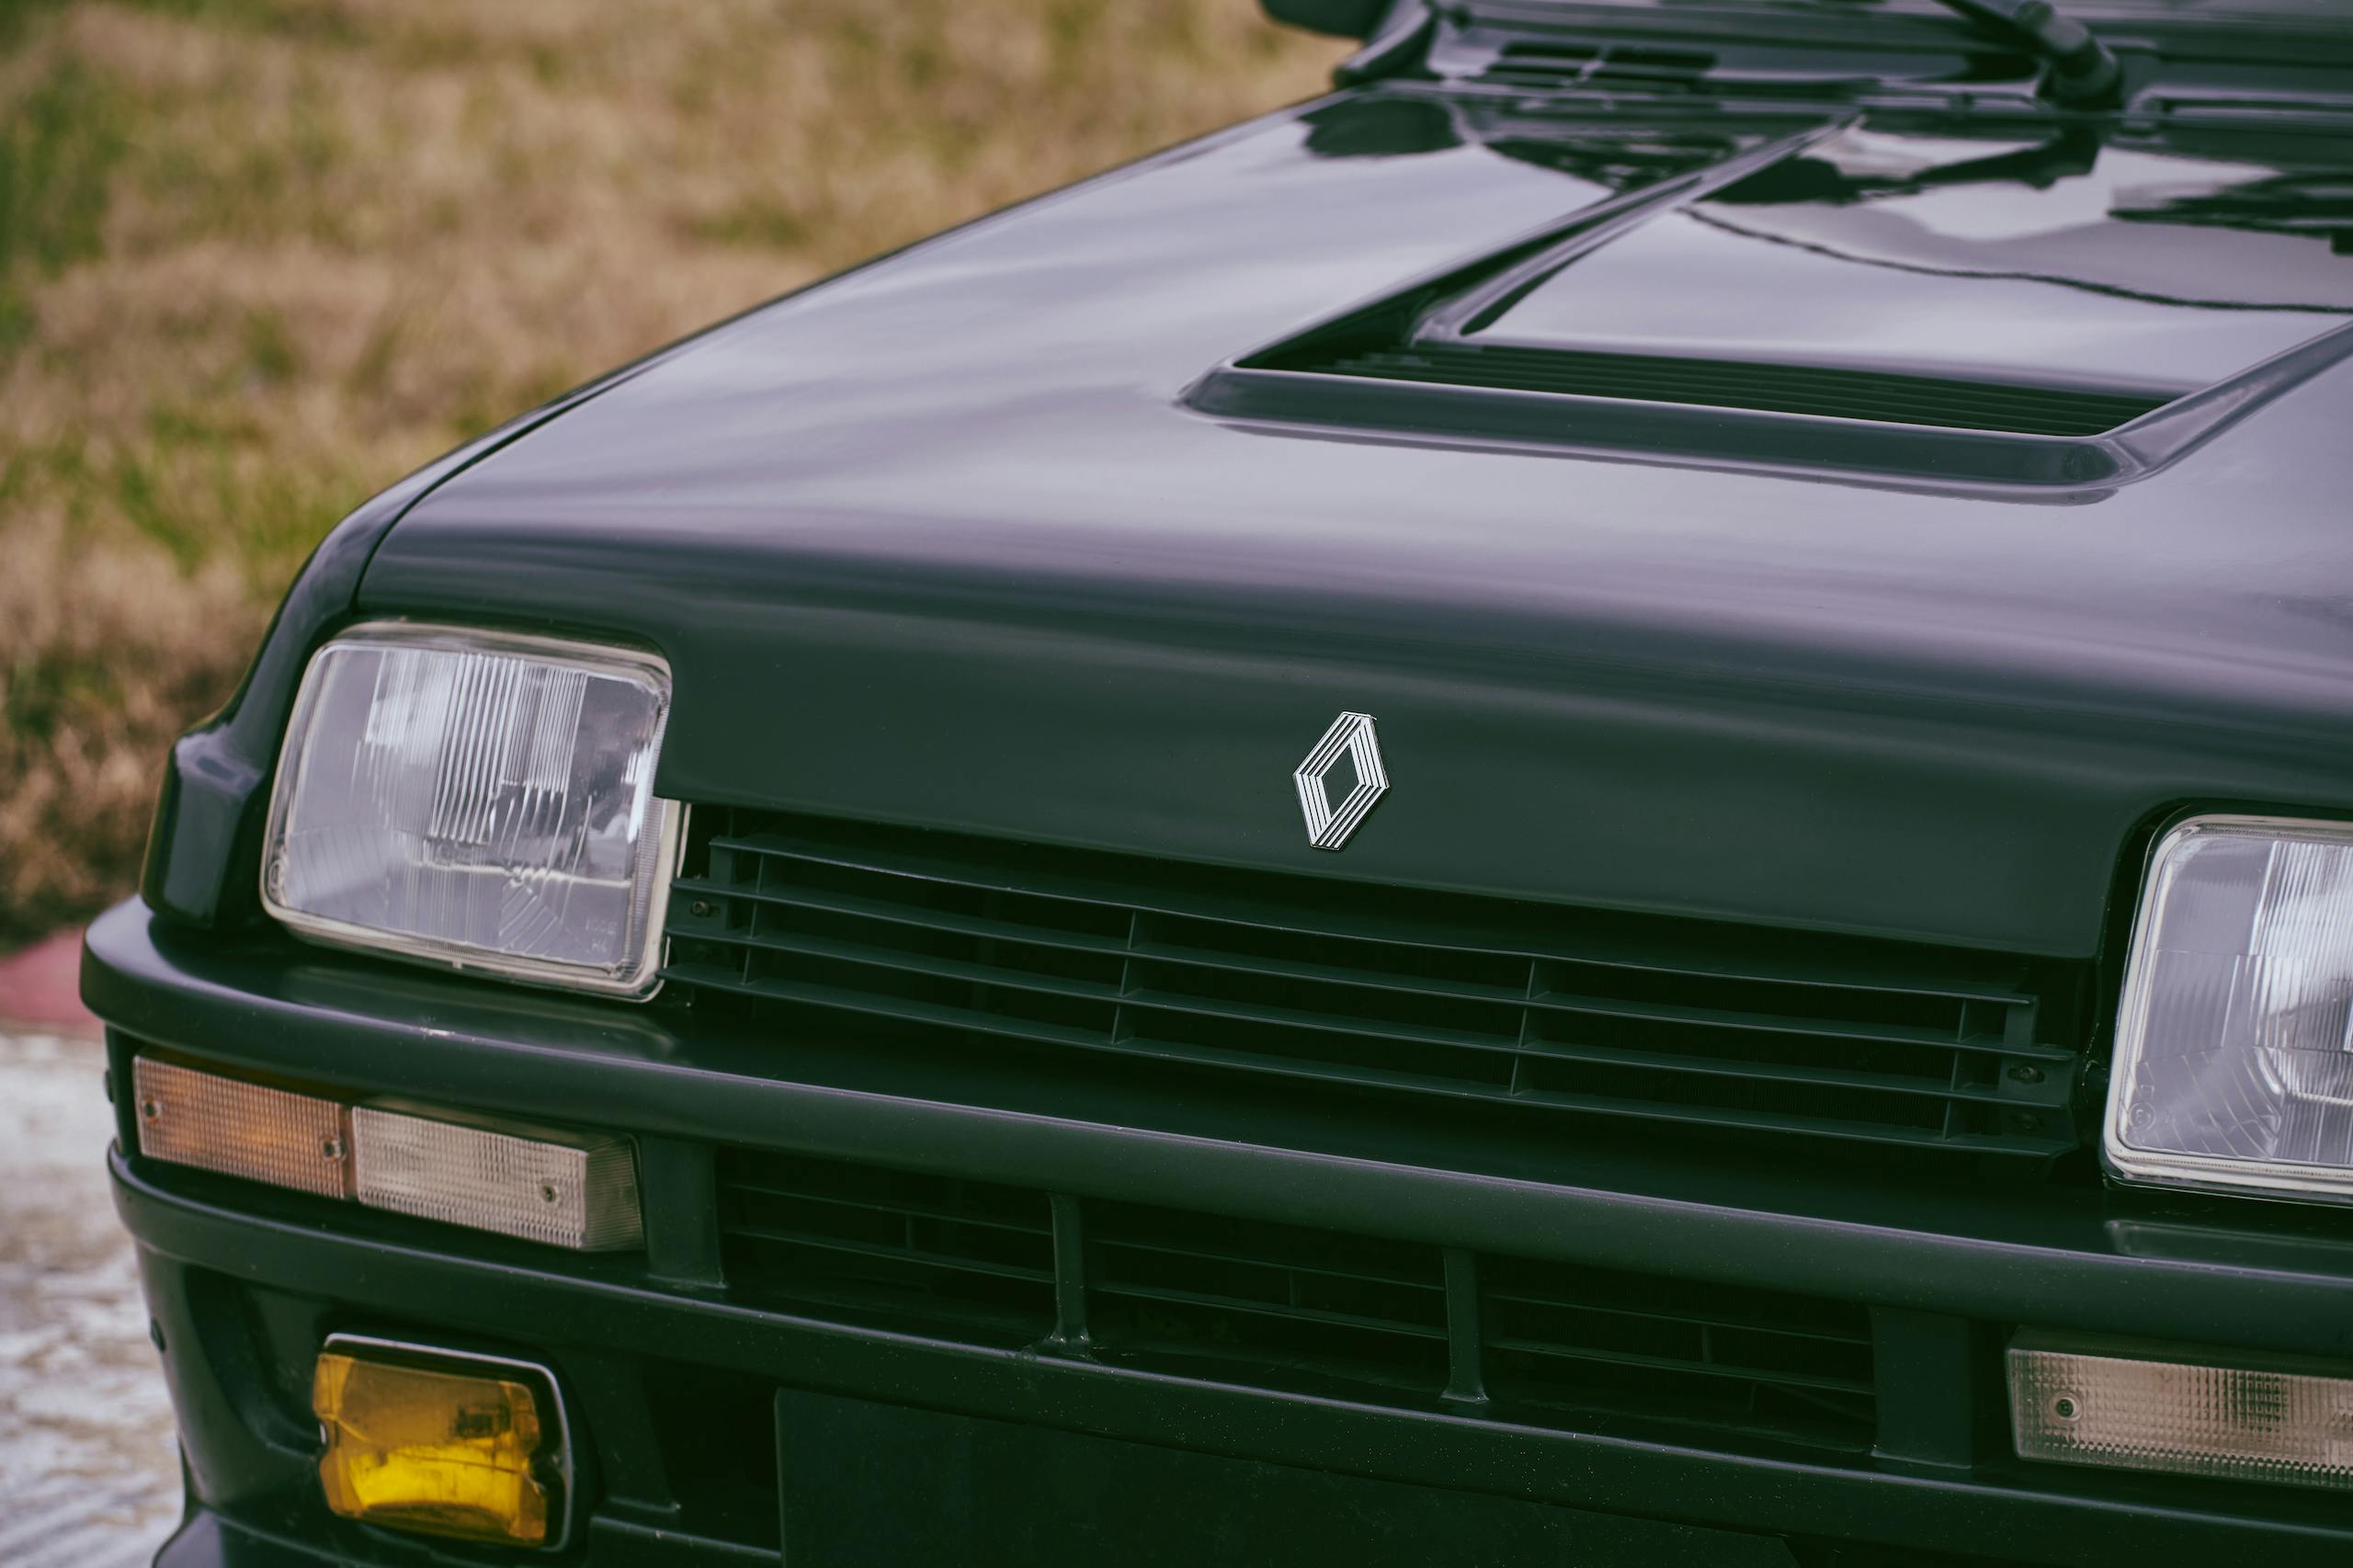 1985 Renault R5 Turbo 2 front detail